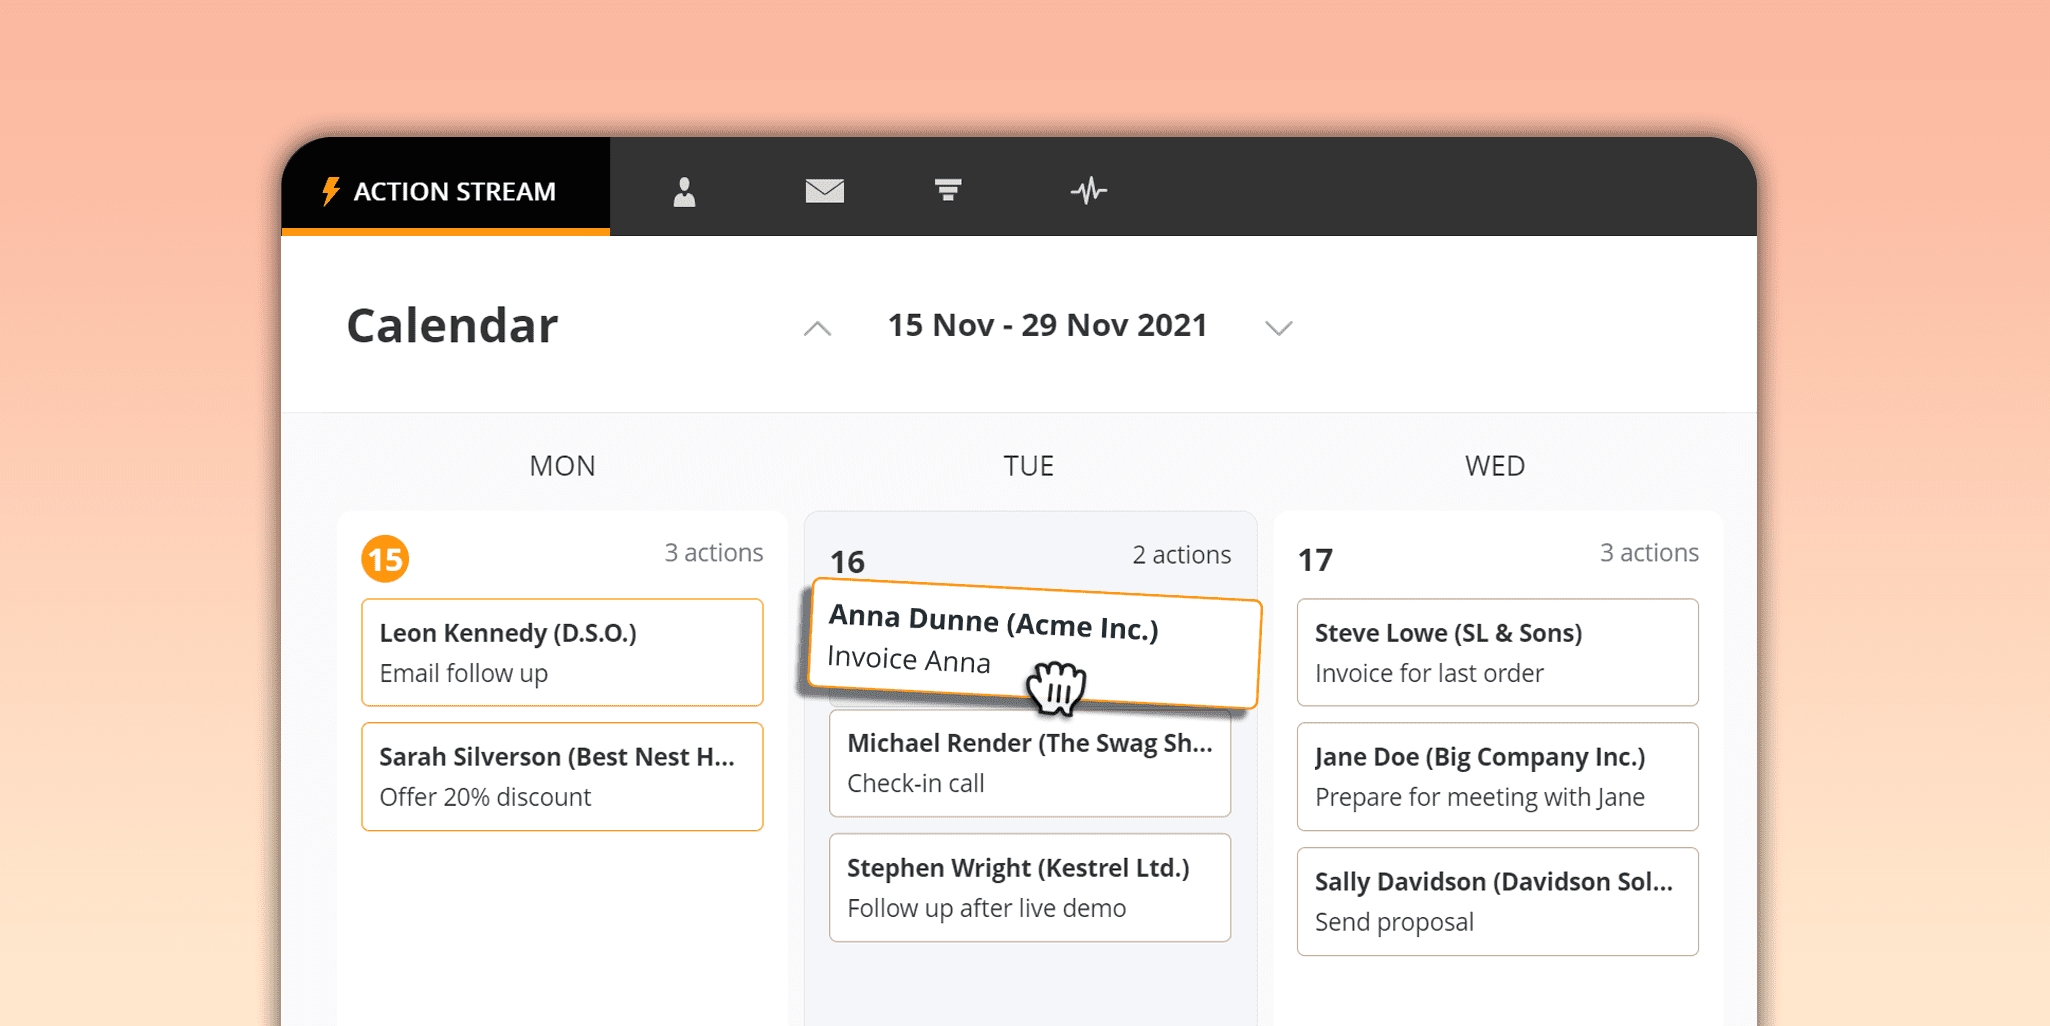 You can review your Next Actions in Calendar View